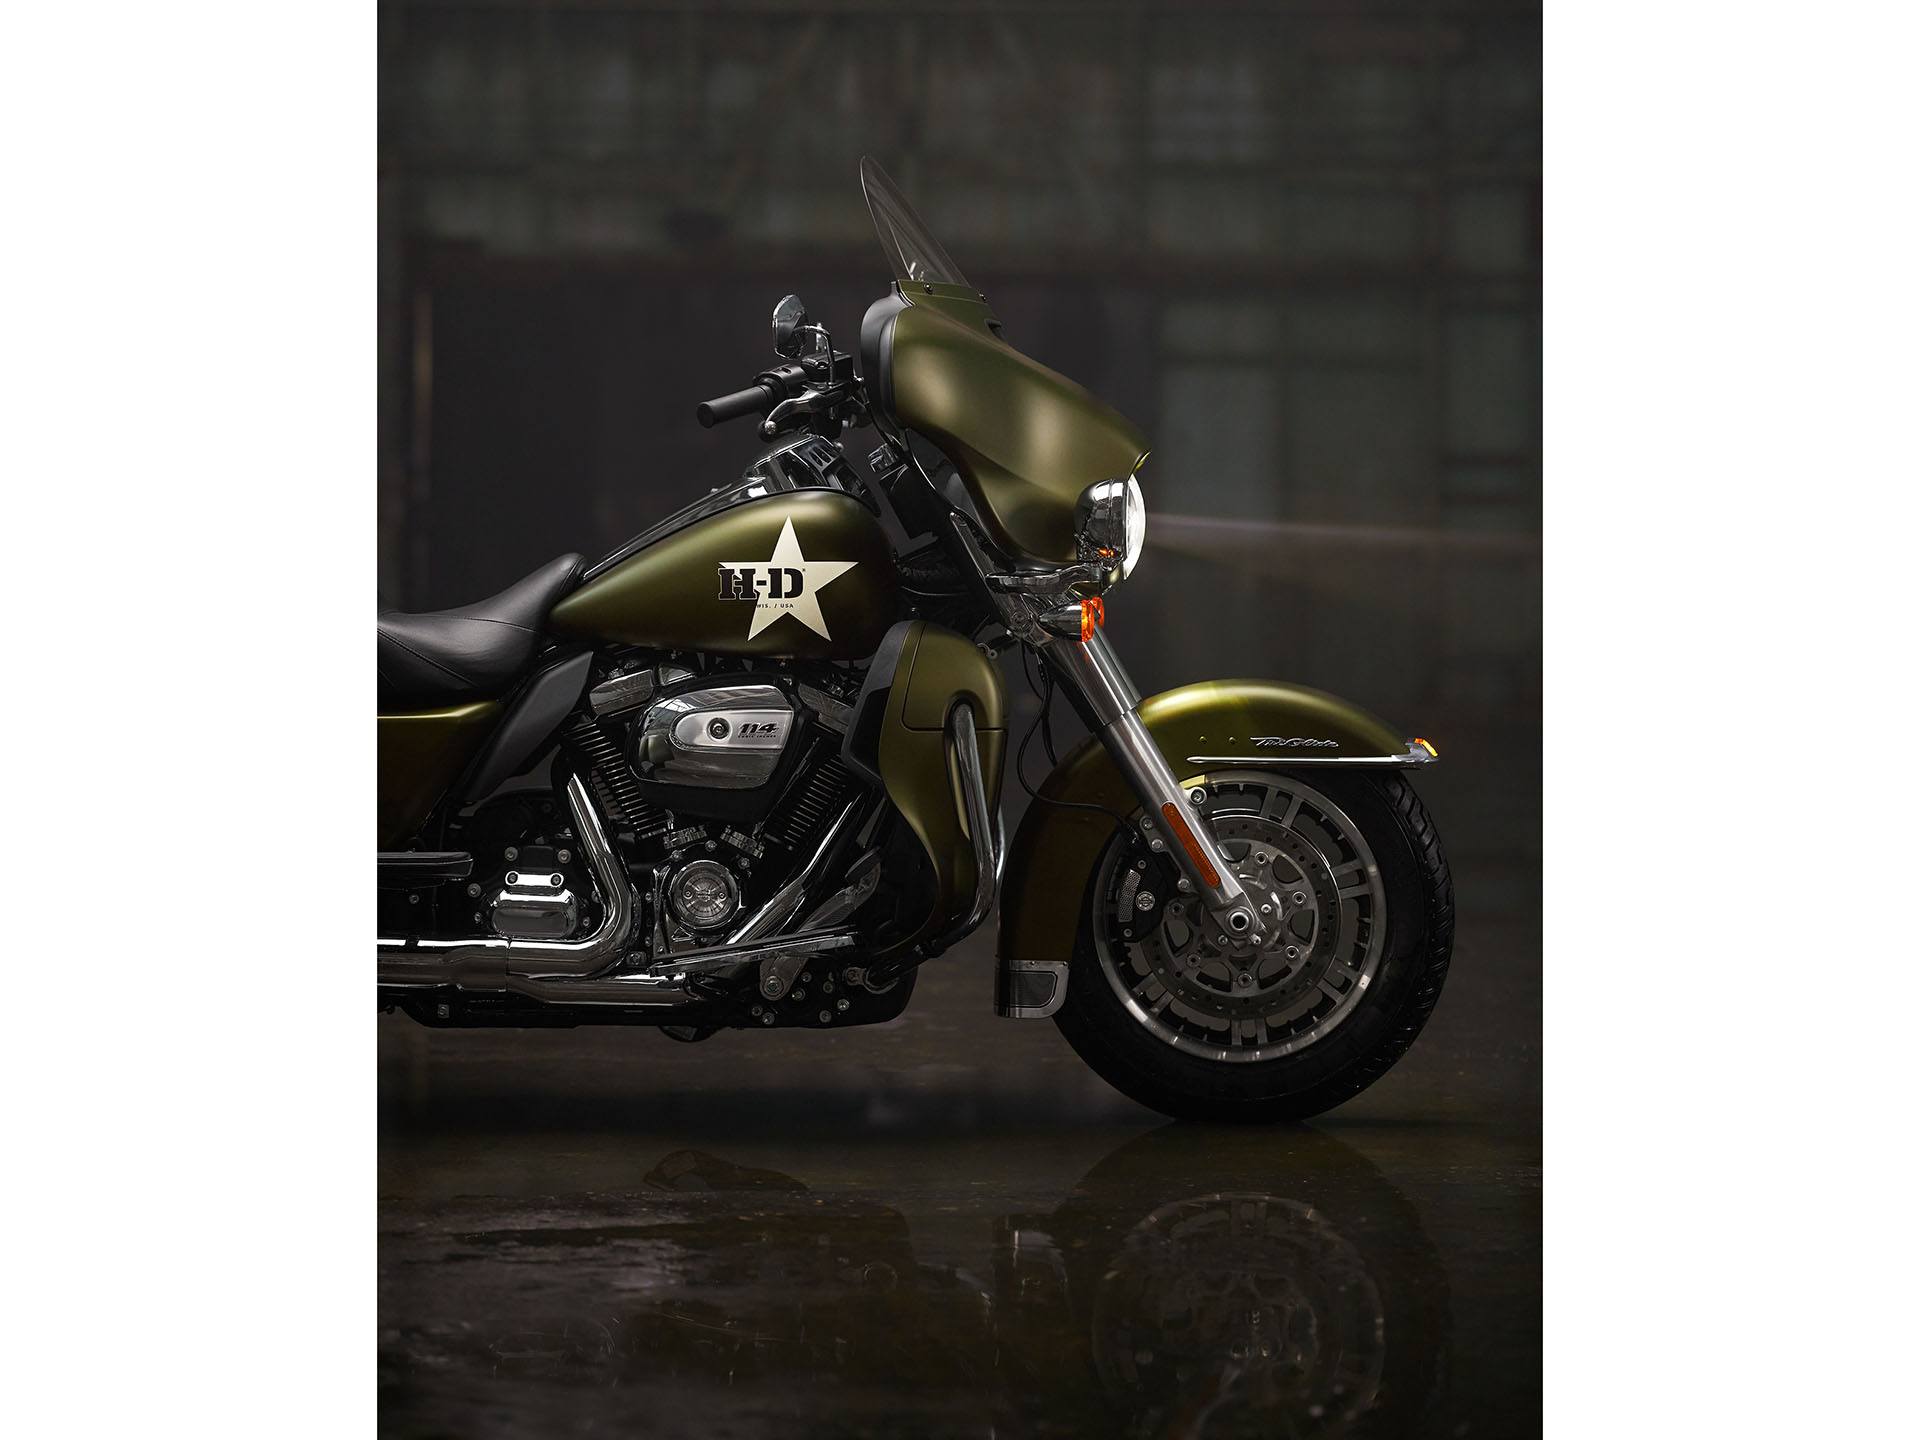 2022 Harley-Davidson Tri Glide Ultra (G.I. Enthusiast Collection) in New London, Connecticut - Photo 2